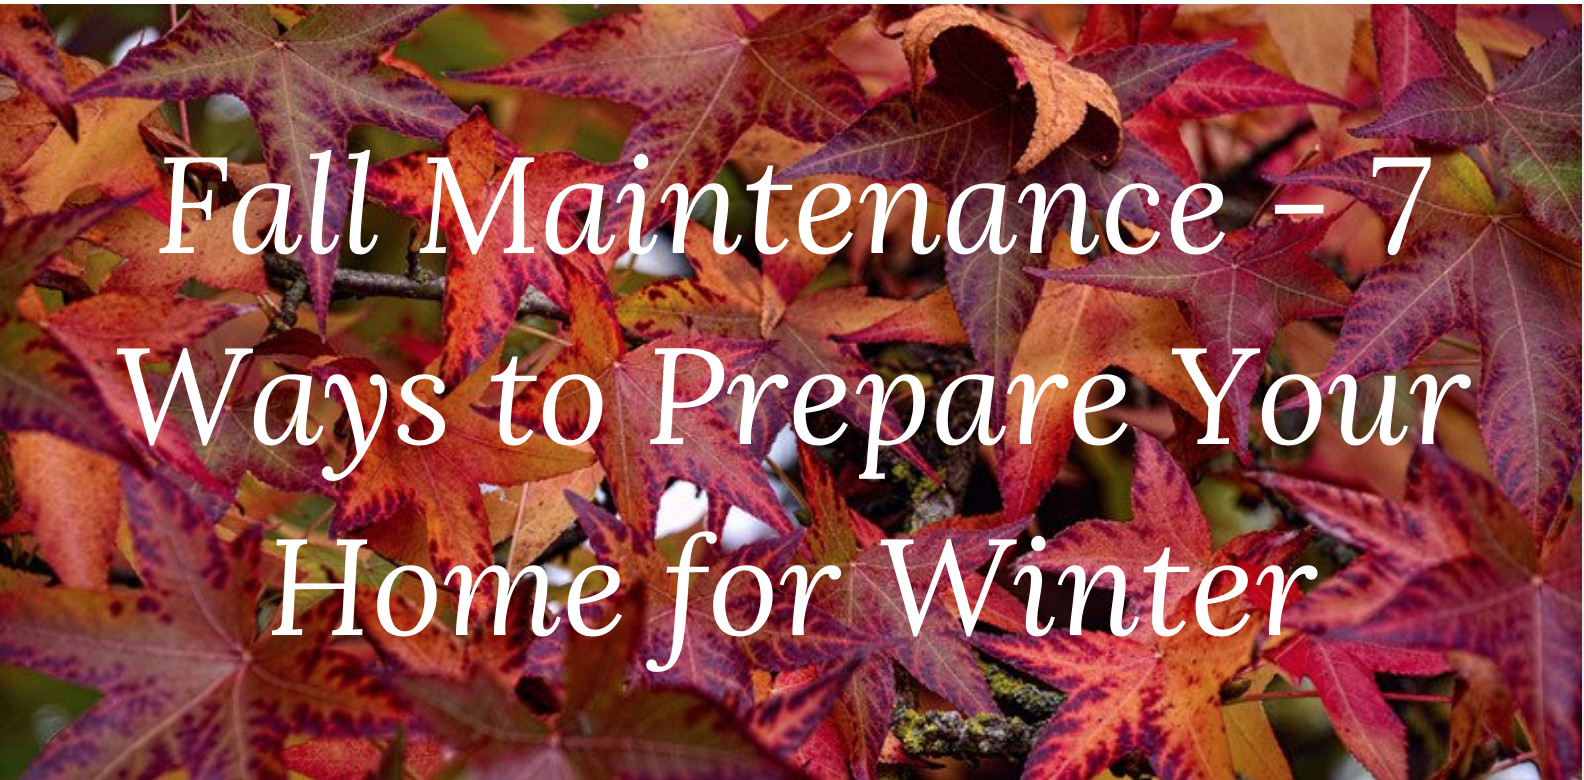 7 Ways to Prepare Your Home for Winter